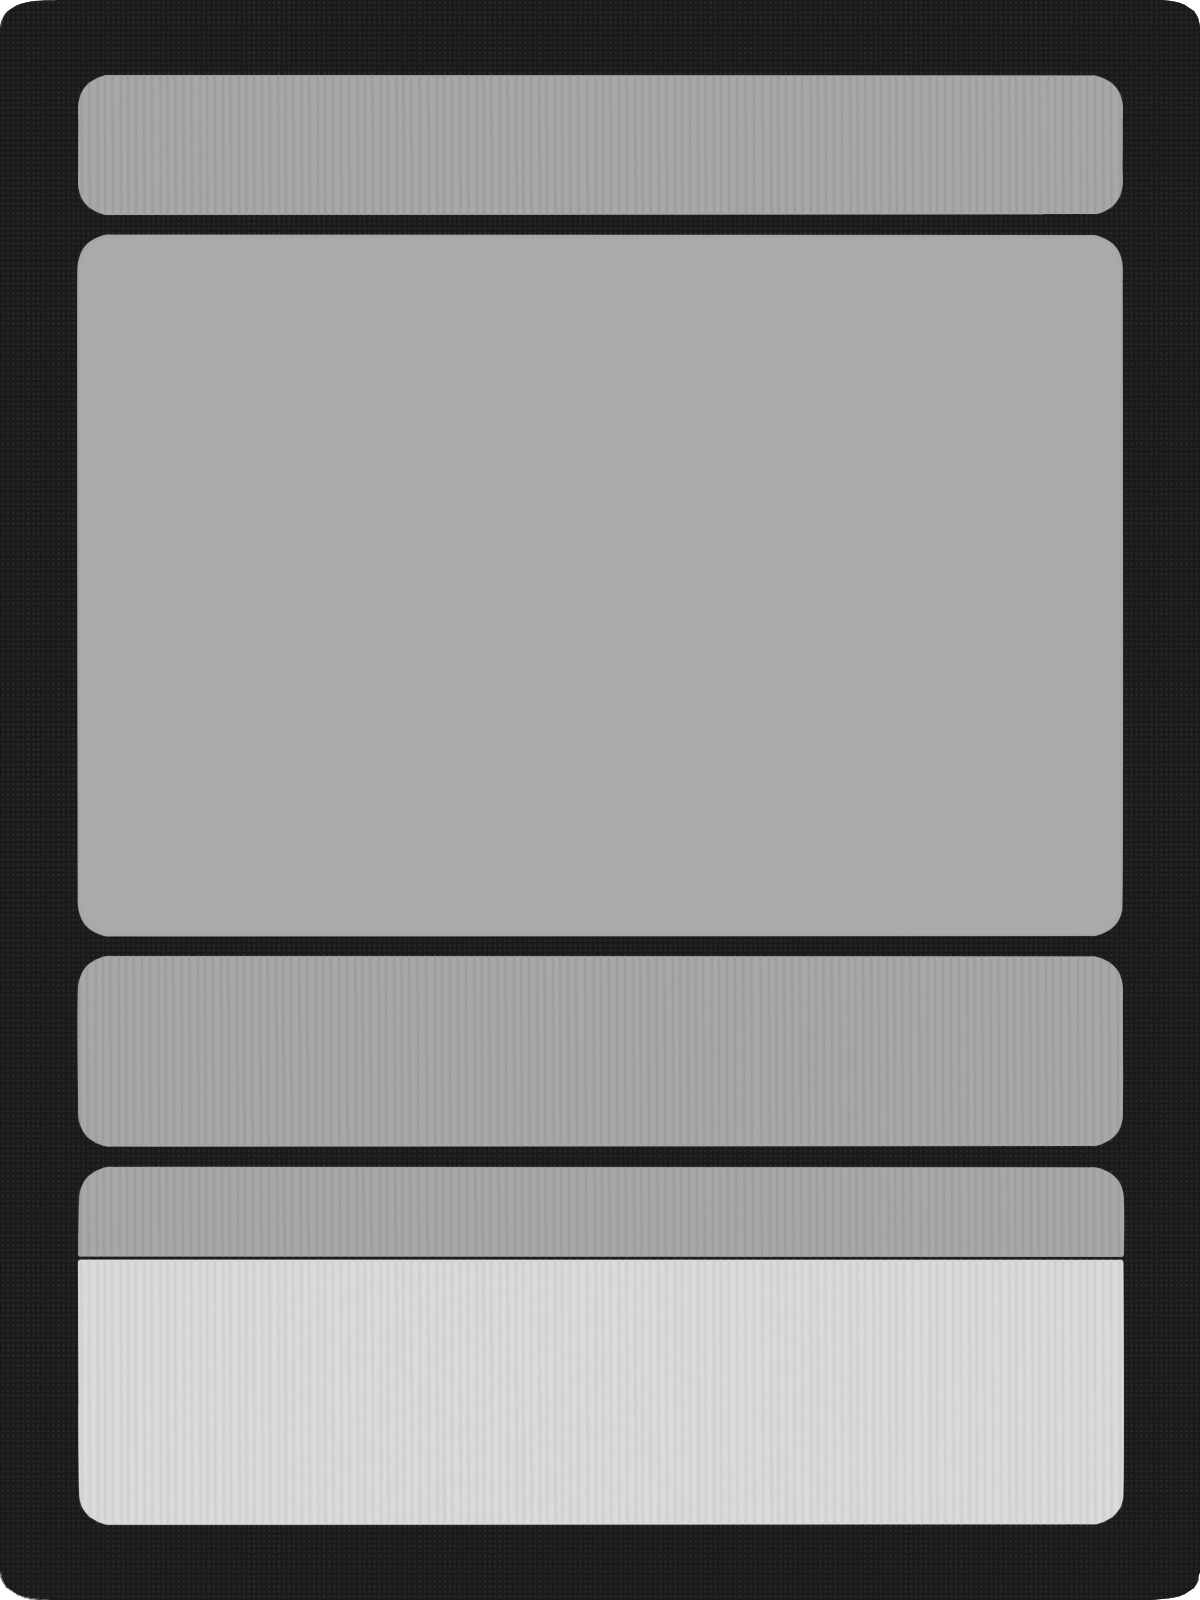 This Is A Free To Use Template For Those Wishing With Regard To Blank Magic Card Template